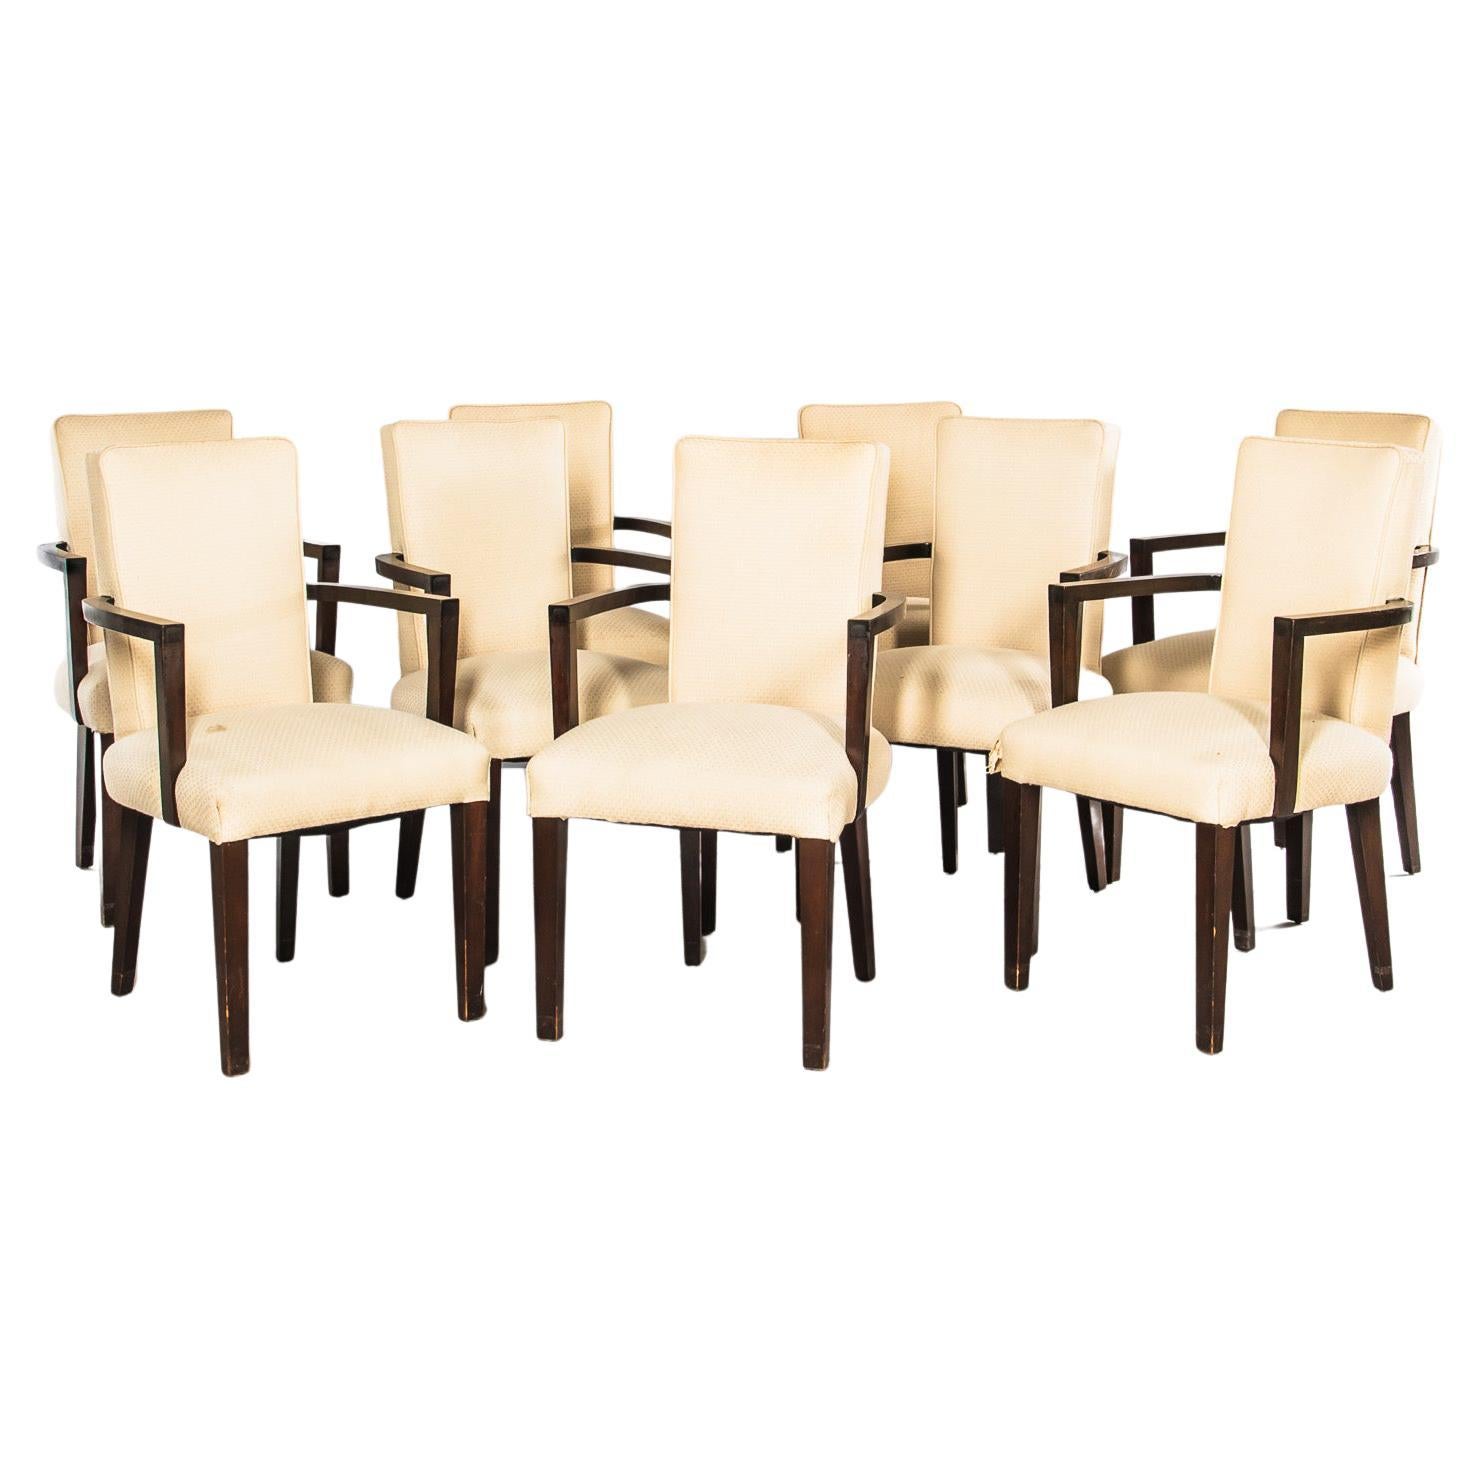 10 Archibald Taylor Art Deco Dining Chairs For Sale